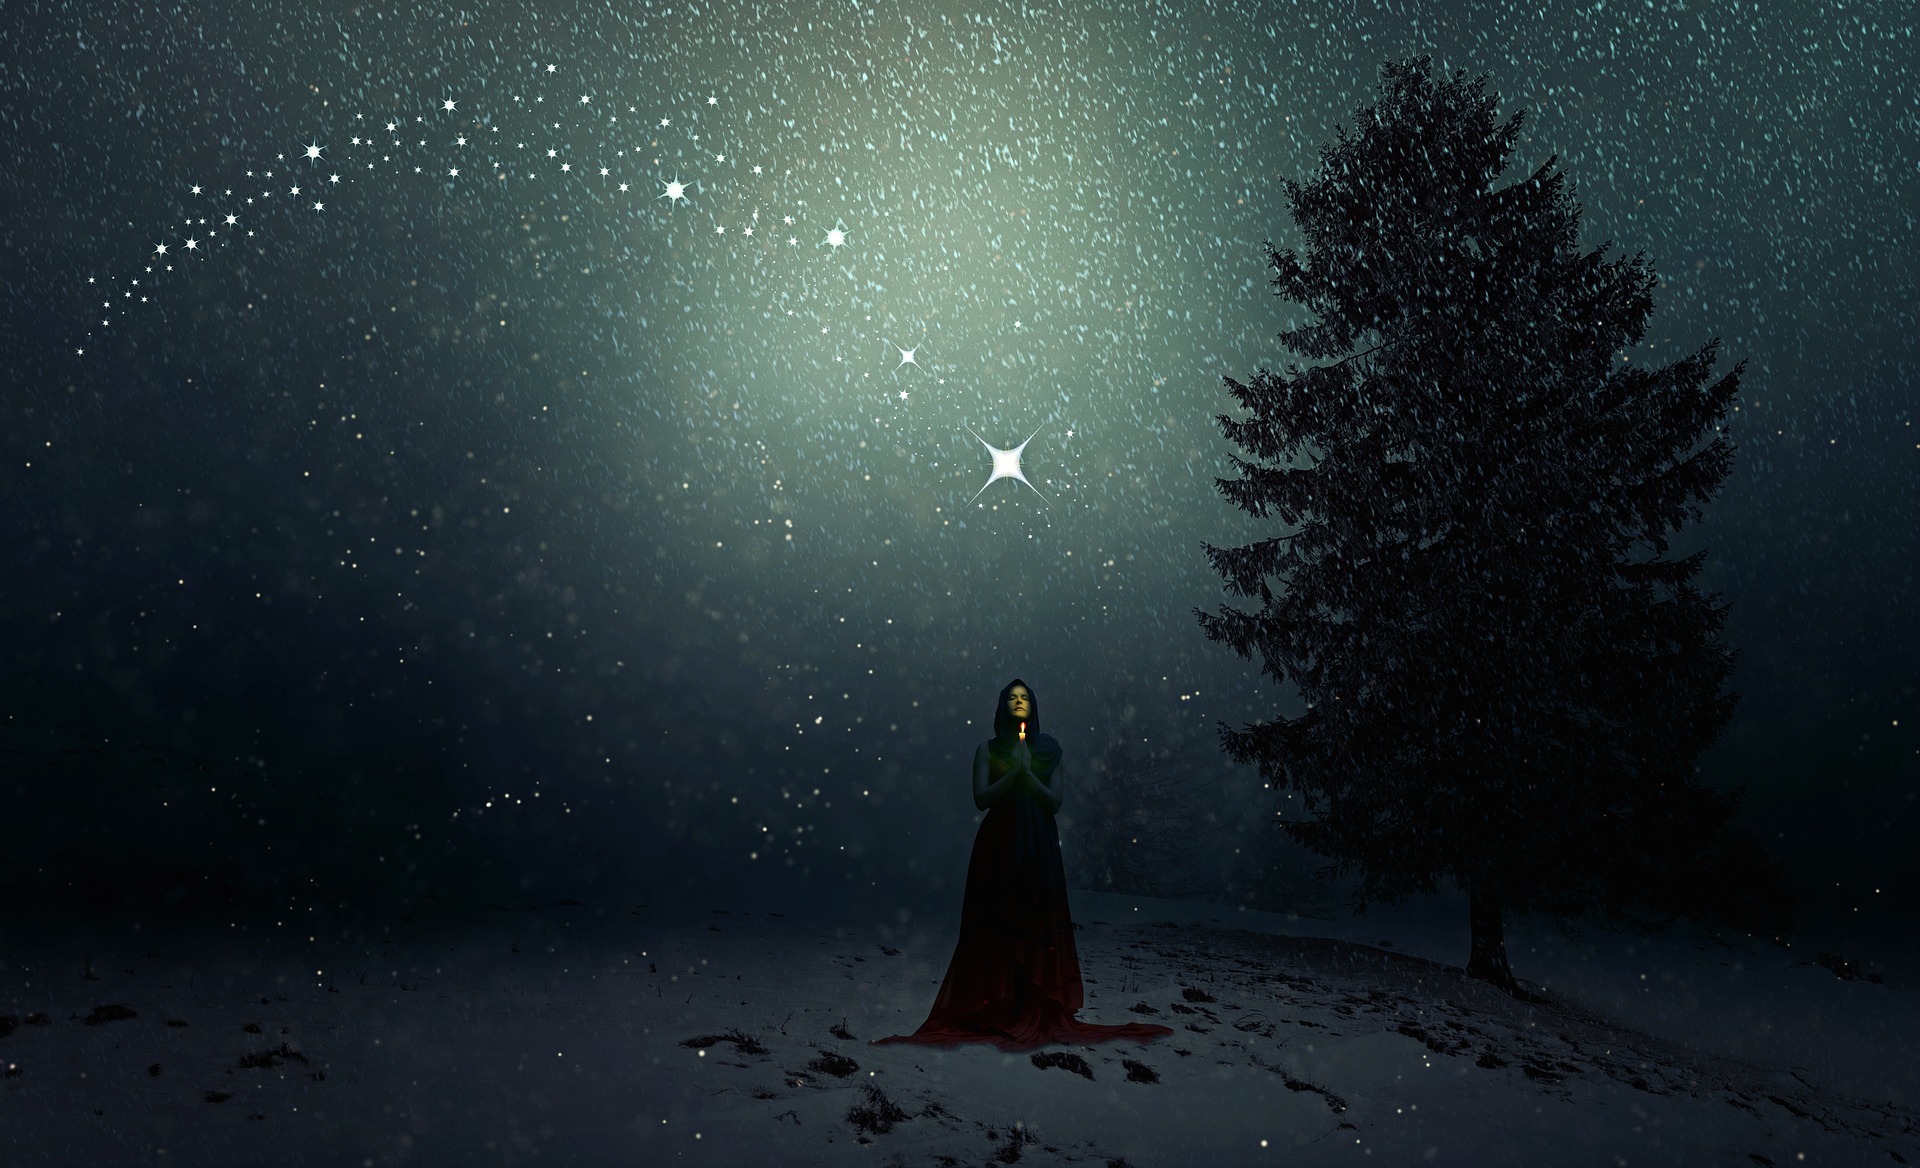 Woman in long red skirt and green shawl  holding candle in starlit night and snow, under bright star, by tree.